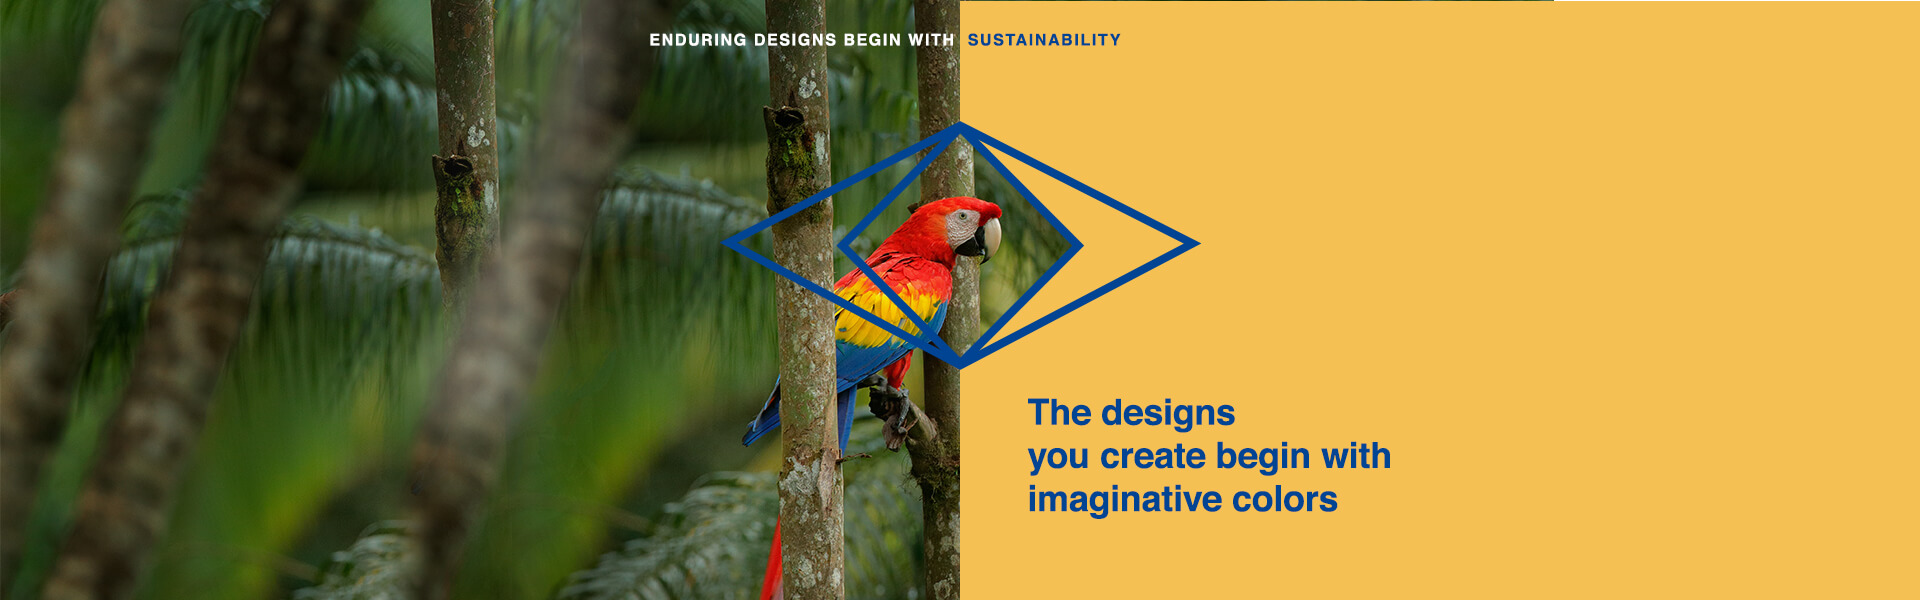 Enduring designs begin with Sustainability 